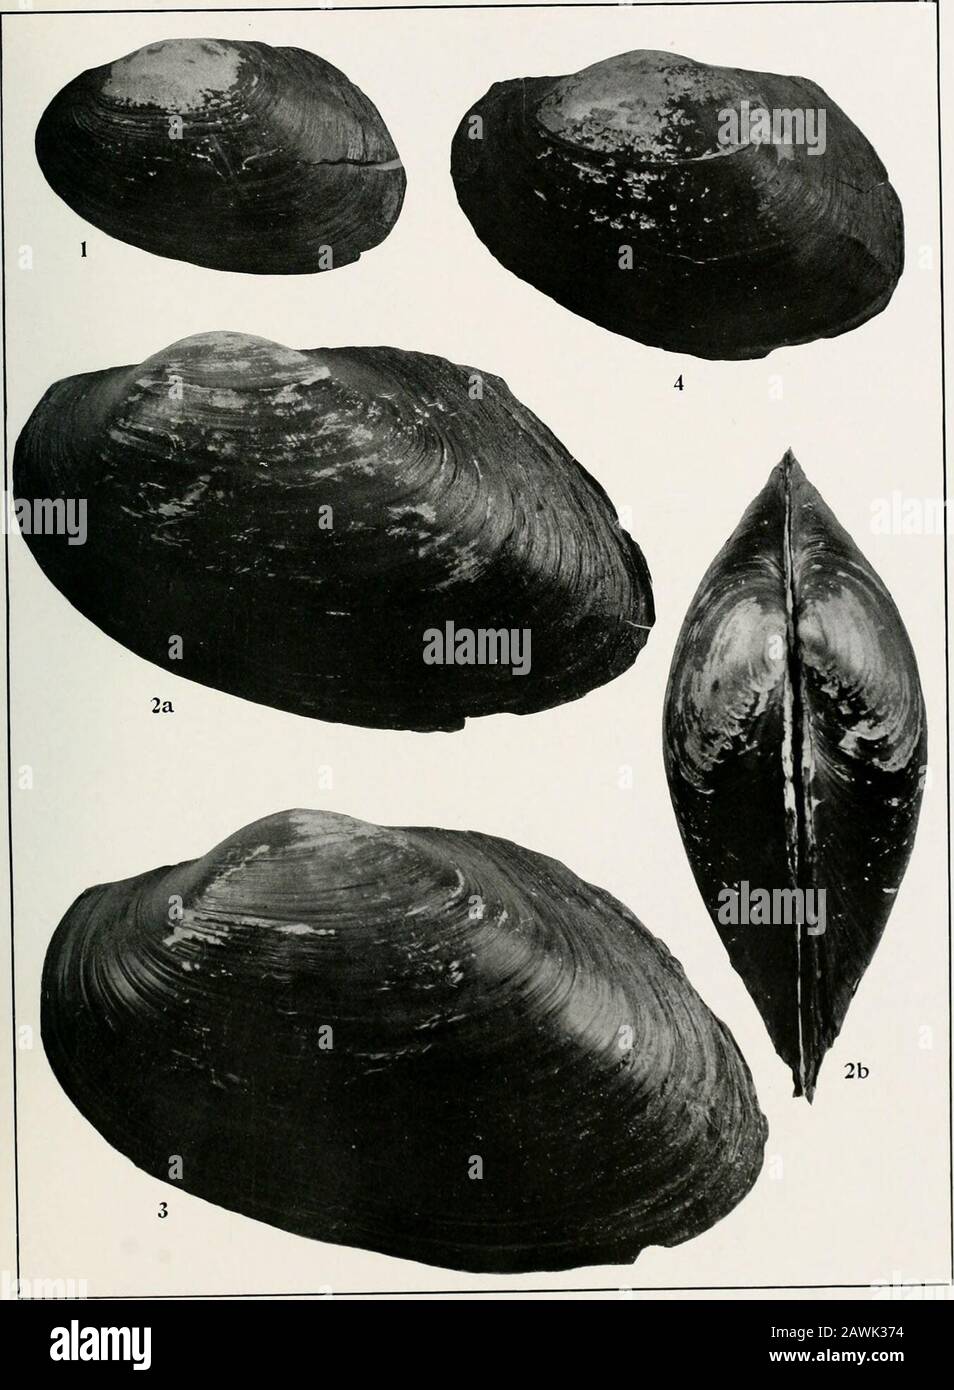 South American Naiades : a contribution to the knowledge of the freshwater mussels of South America . F THE CARNEGIE MUSEUM. EXPLANATION OF PLATE XLIIL Shells of Anodontites iheringi (Clessin), Anodontites riograndensis (VonIhering), and Anodontites forbesiana (Lea). All figures natural size. Fig. L Anodontites iheringi (Clessin), from Vaccahy-mirim, Santa Maria, RioGrande do Sul, Brazil. Carn. Mus. Cat. No. 6L5815 (See also Plate XLH, fig. 8, andPlate XLIV, fig. 1). Adult female (No. 3), lateral view (See also Plate XLIV, fig. 1). Figs. 2 and 3. Anodontites riograndensis (Von Ihering), from R Stock Photo